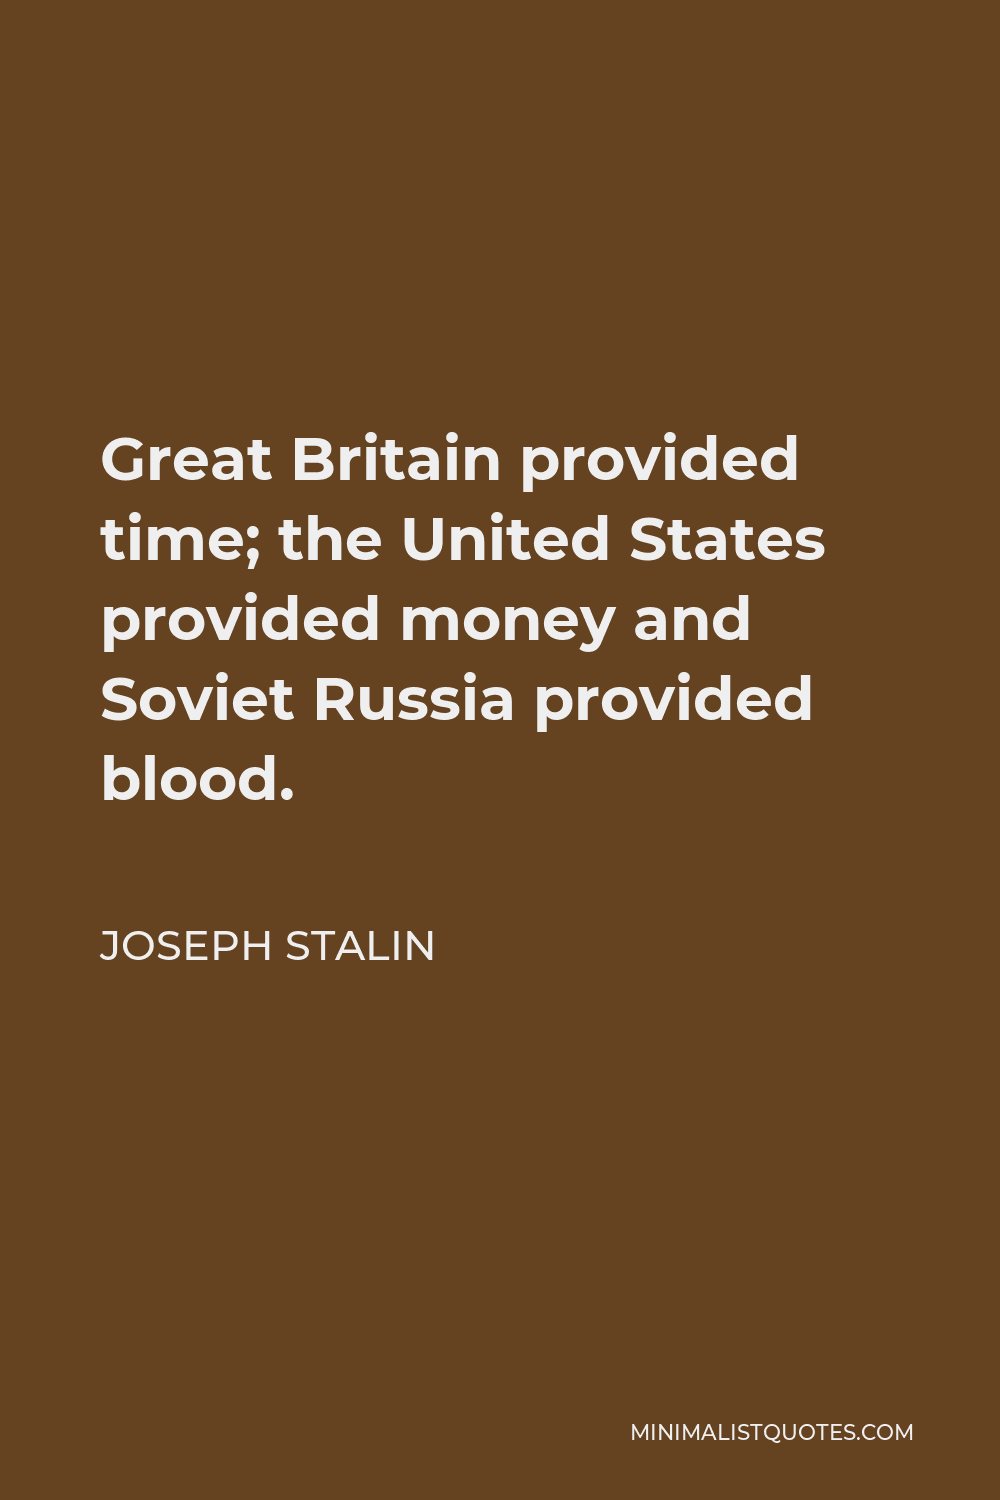 Joseph Stalin Quote - Great Britain provided time; the United States provided money and Soviet Russia provided blood.